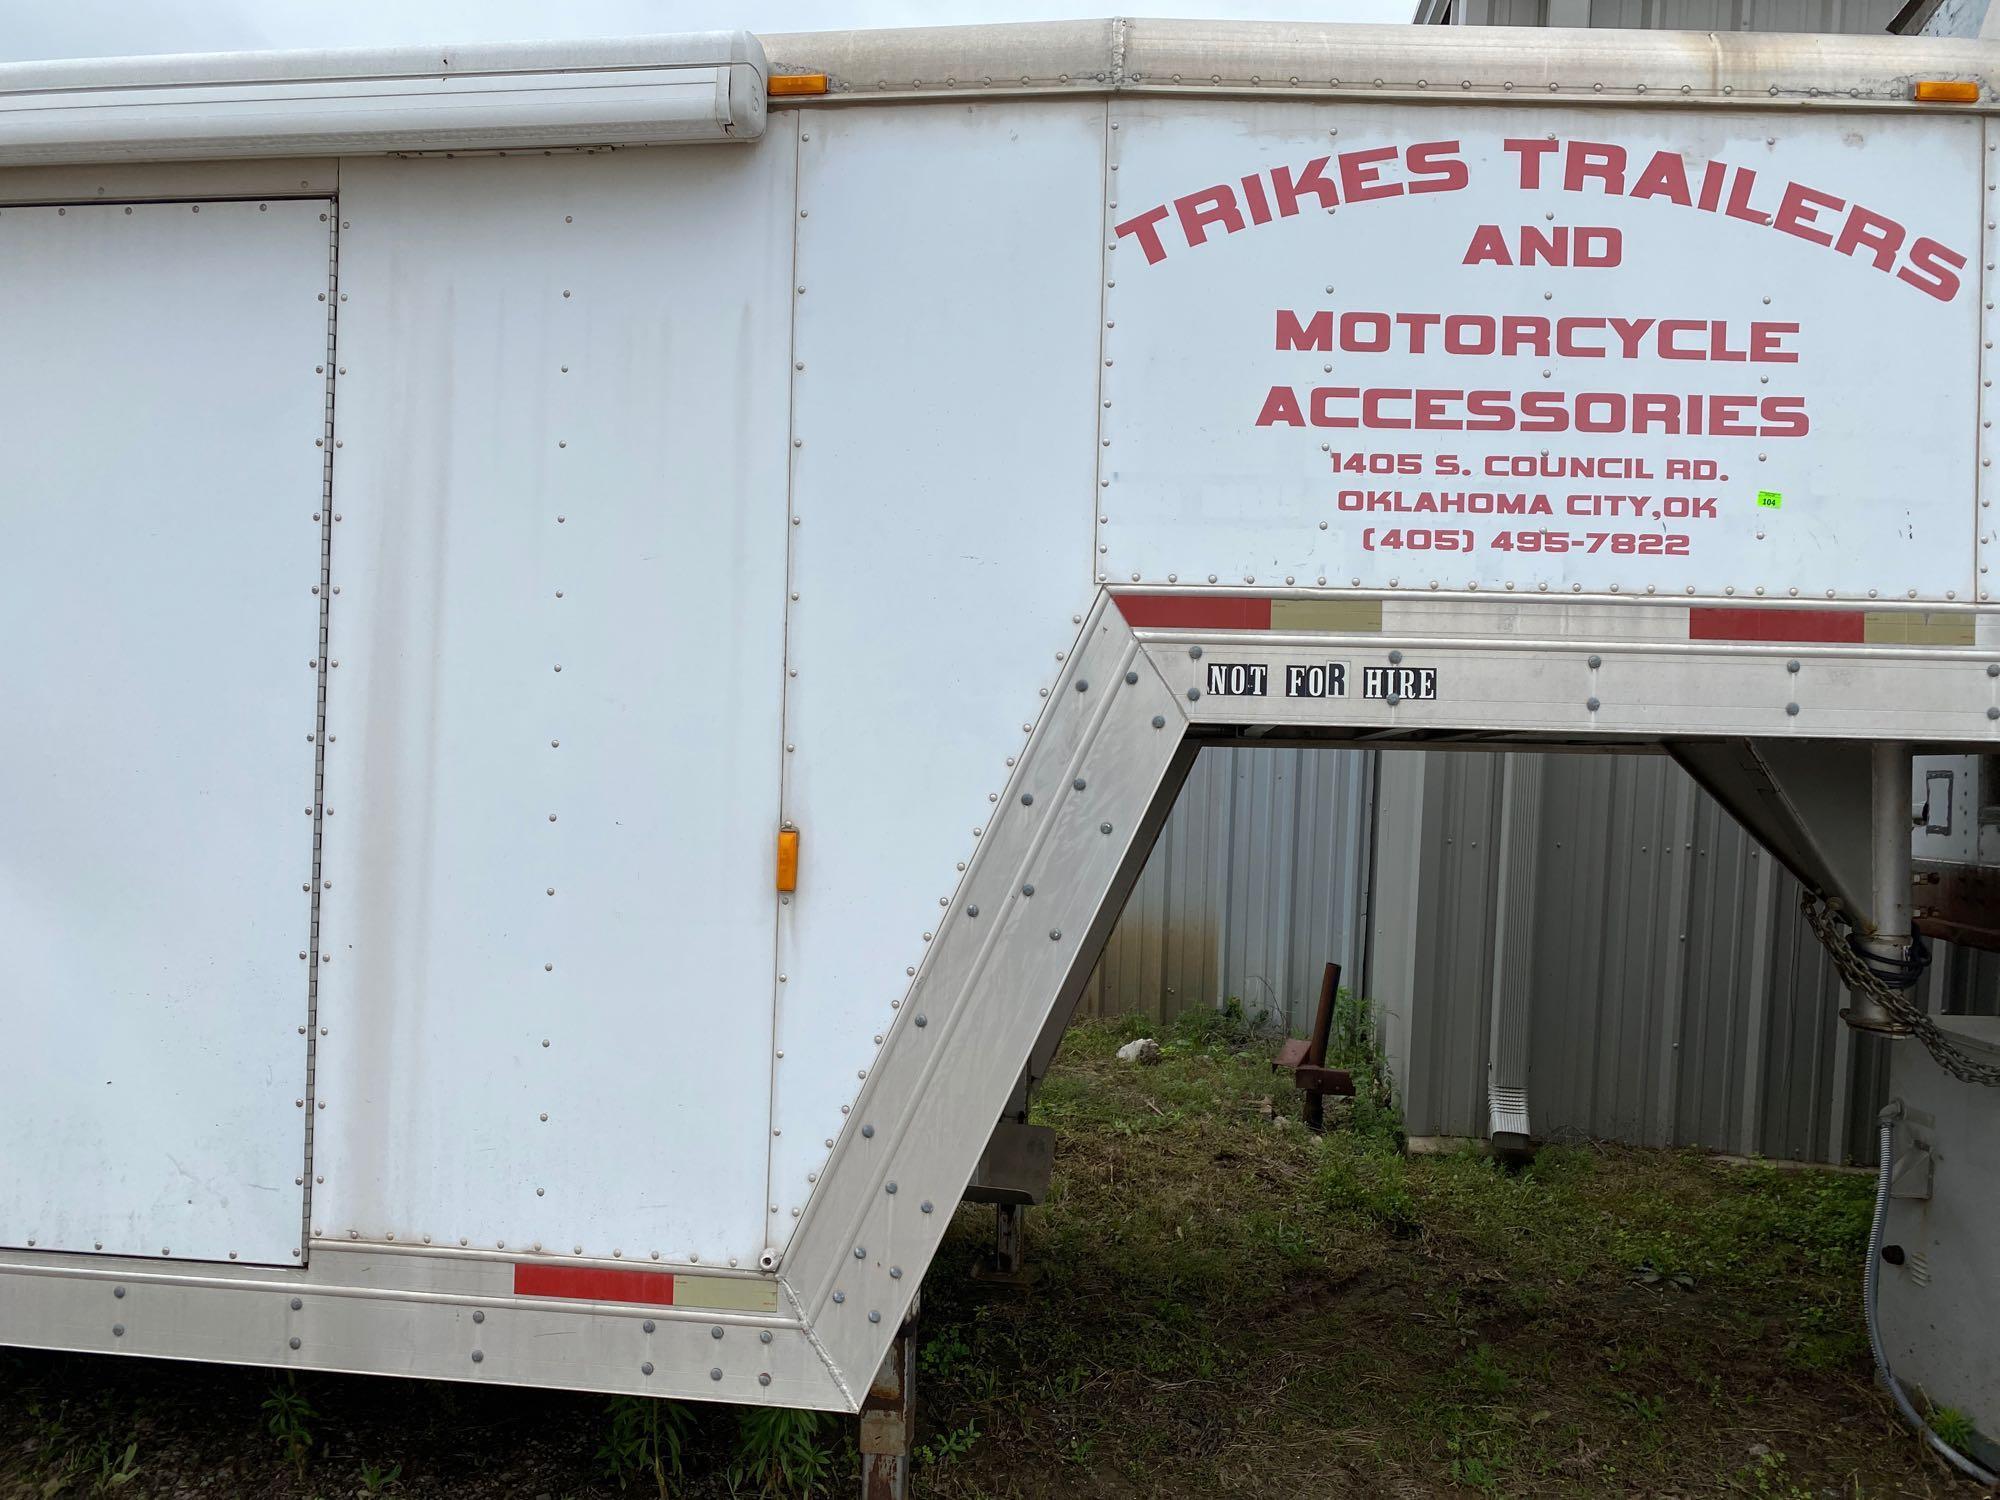 Gooseneck trailer Exis Aluminum with Awning Torsion Axles... approximately 40 ft on the floor. Total